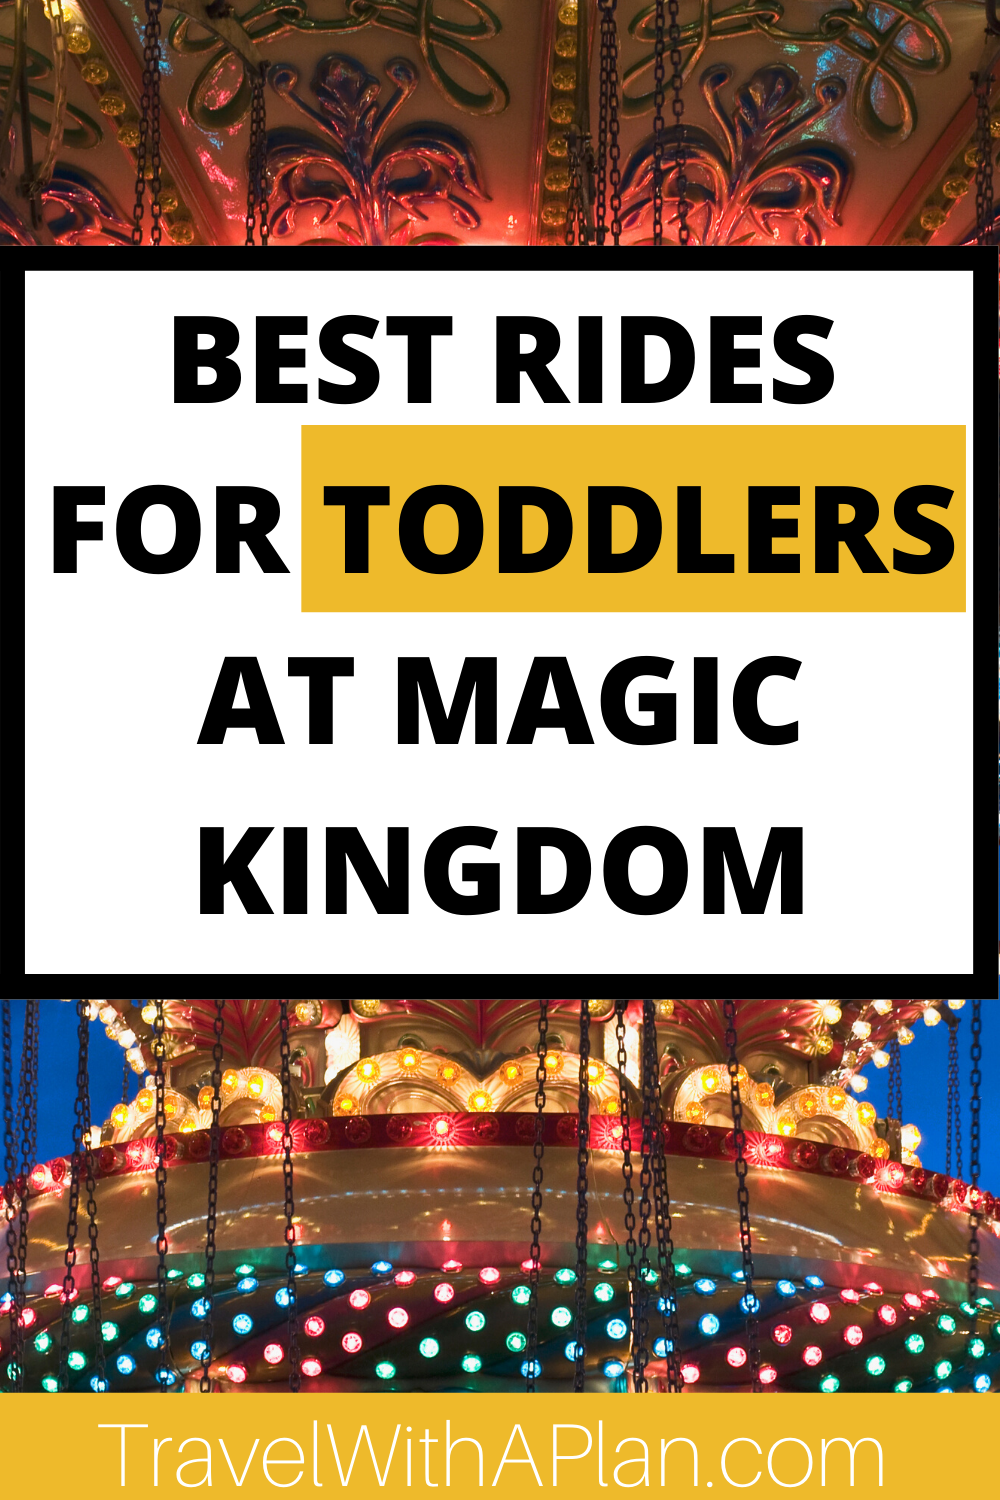 Discover the absolute best Magic Kingdom rides for toddlers!  Having an effective touring plan and ride strategy when traveling to Magic Kingdom with toddlers is essential in order to have a happy day at the park!  Get our great tips for Magic Kingdom in one day with toddlers here!  Disney Planning Tips | Best Rides at Magic Kingdom | Traveling with Toddlers#MagicKingdomwithtoddlers #MagicKingdomridesfortoddlers #MagicKingdomtipstoddlers #MagicKingdominonedaywithtoddlers #MagicKingdomschedulewithtoddlers